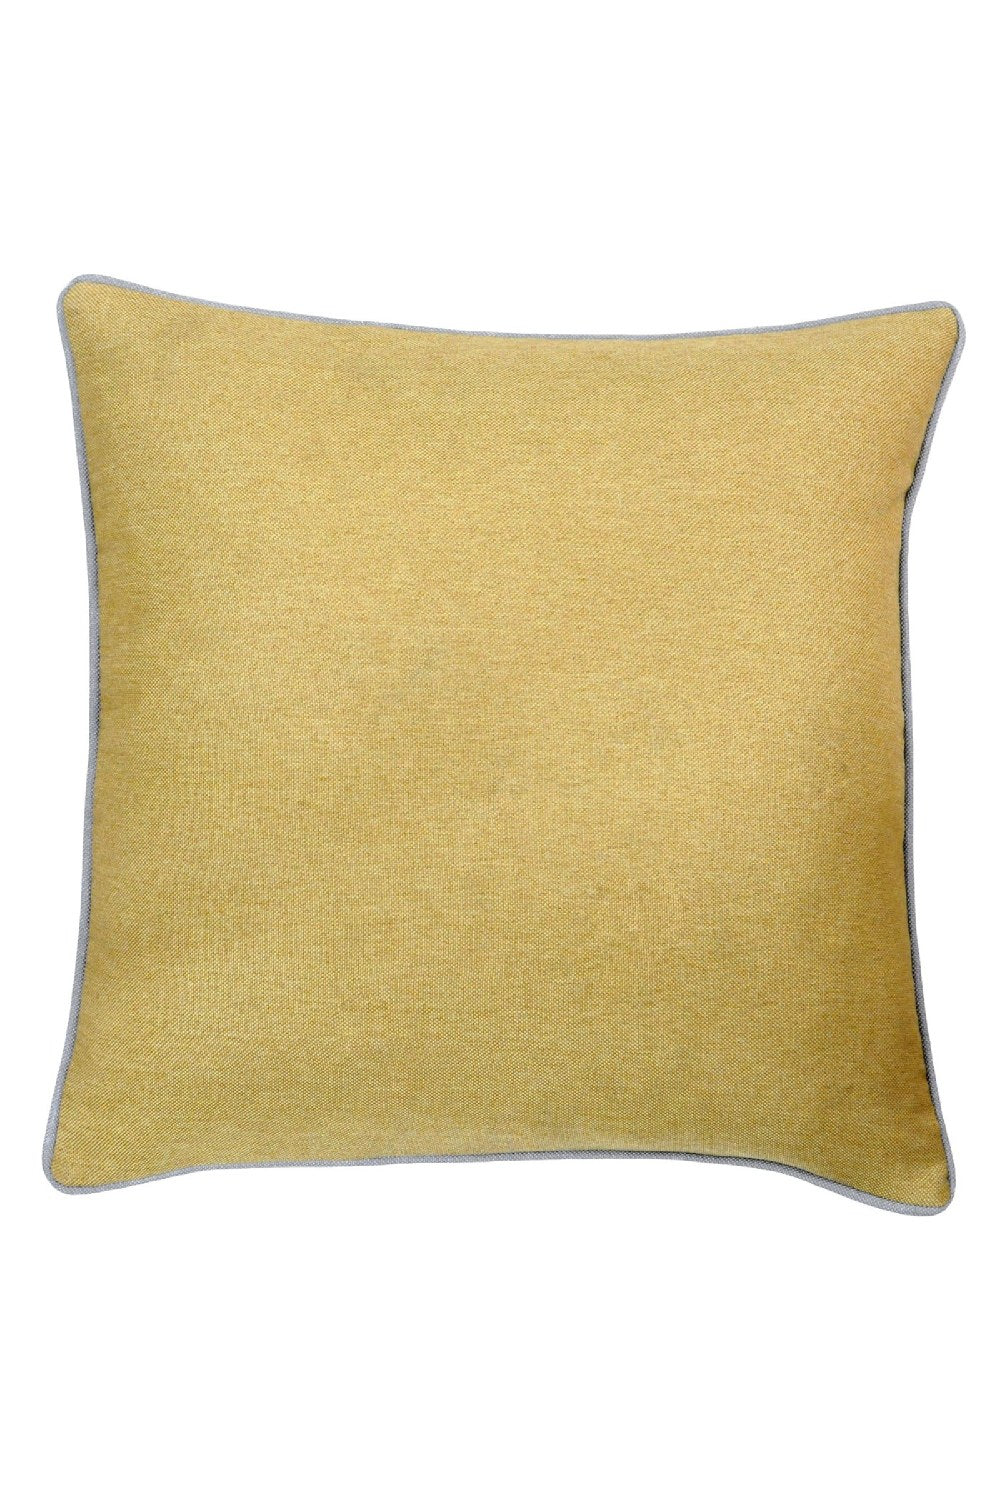 Bellucci Throw Pillow Cover